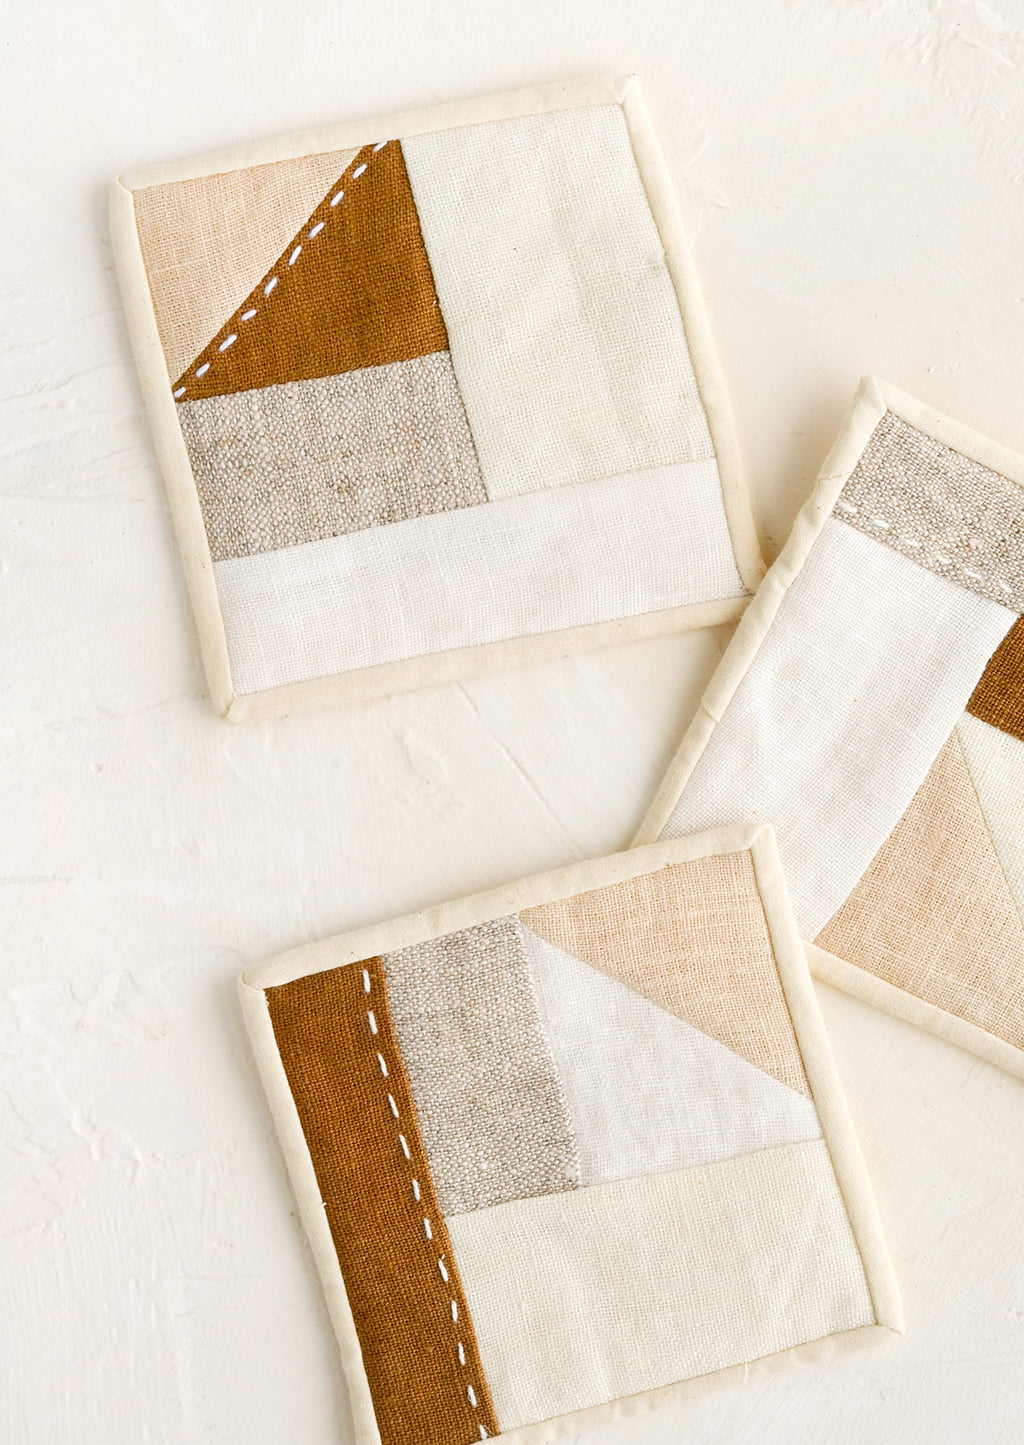 1: Three square drink coasters made from neutral hued patchwork fabric.